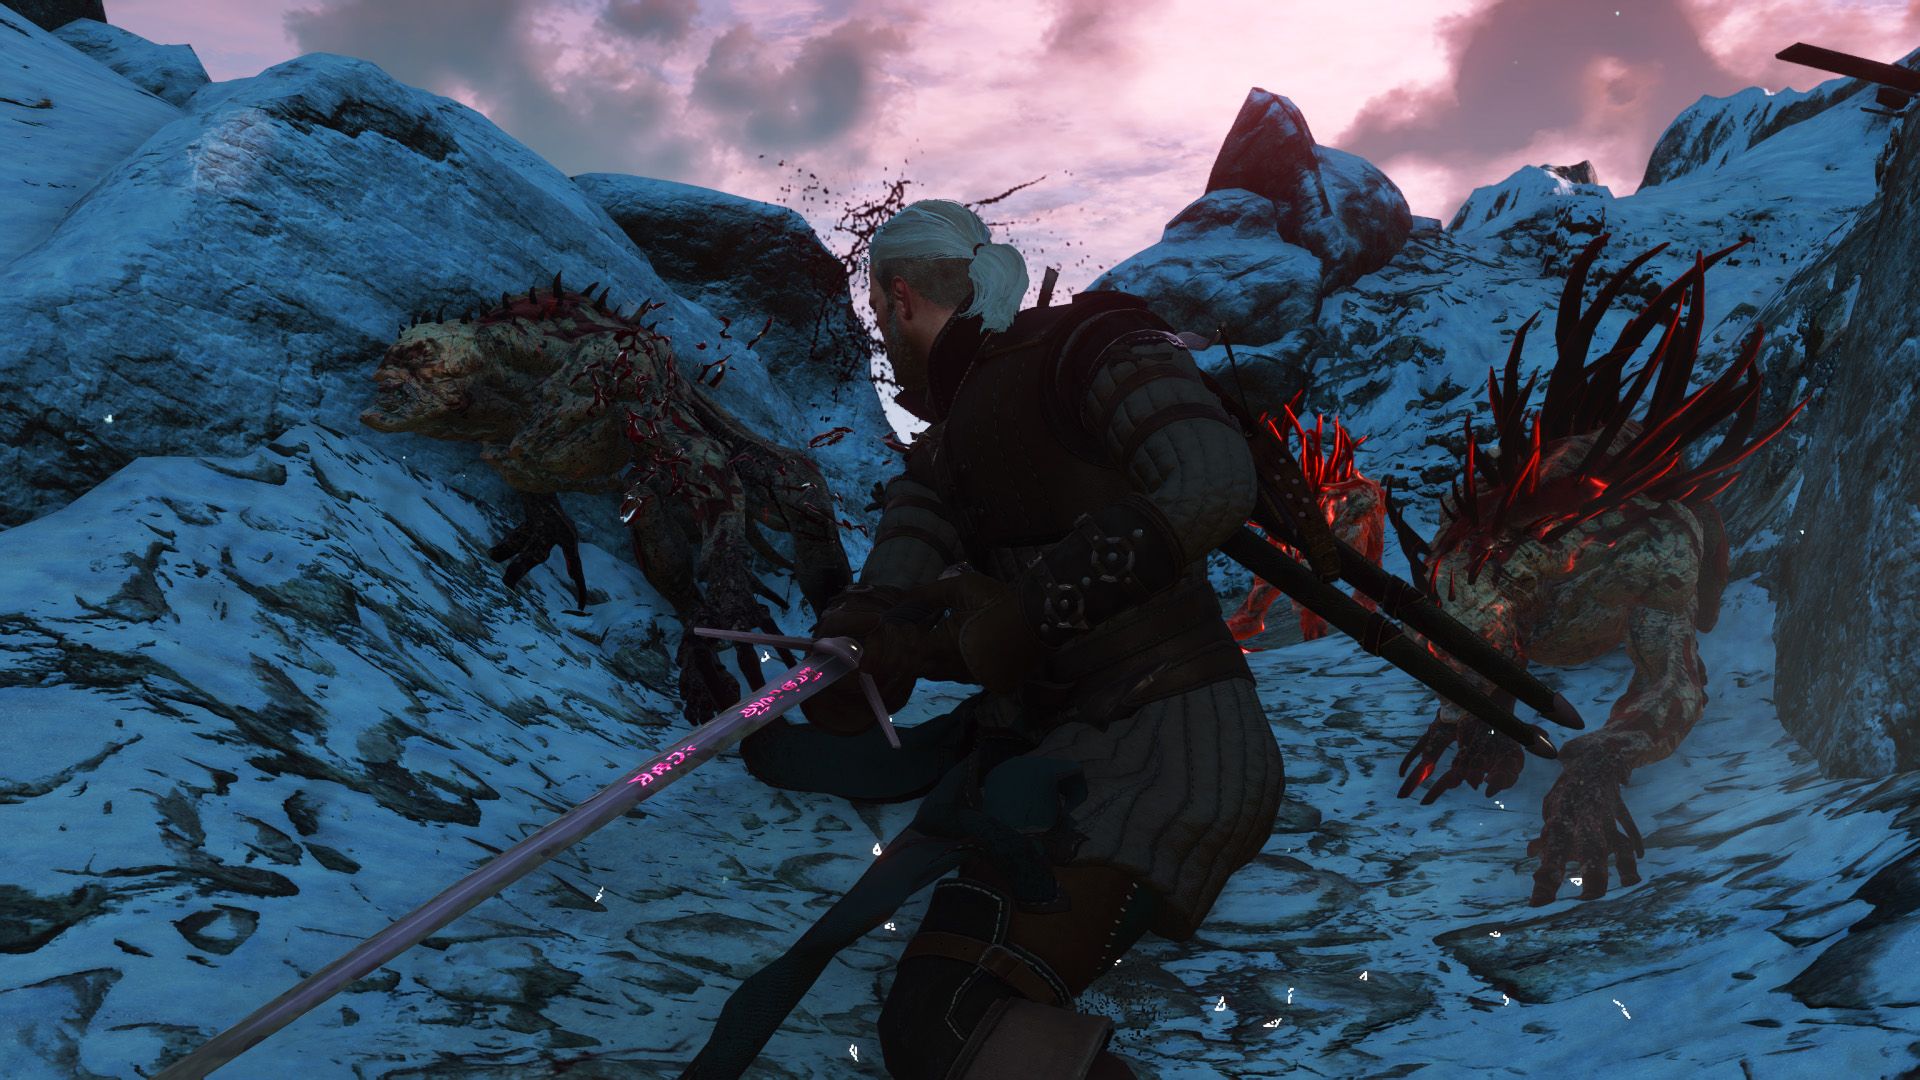 Geralt battles a trio of Alghurs in the pass, all with spikes.